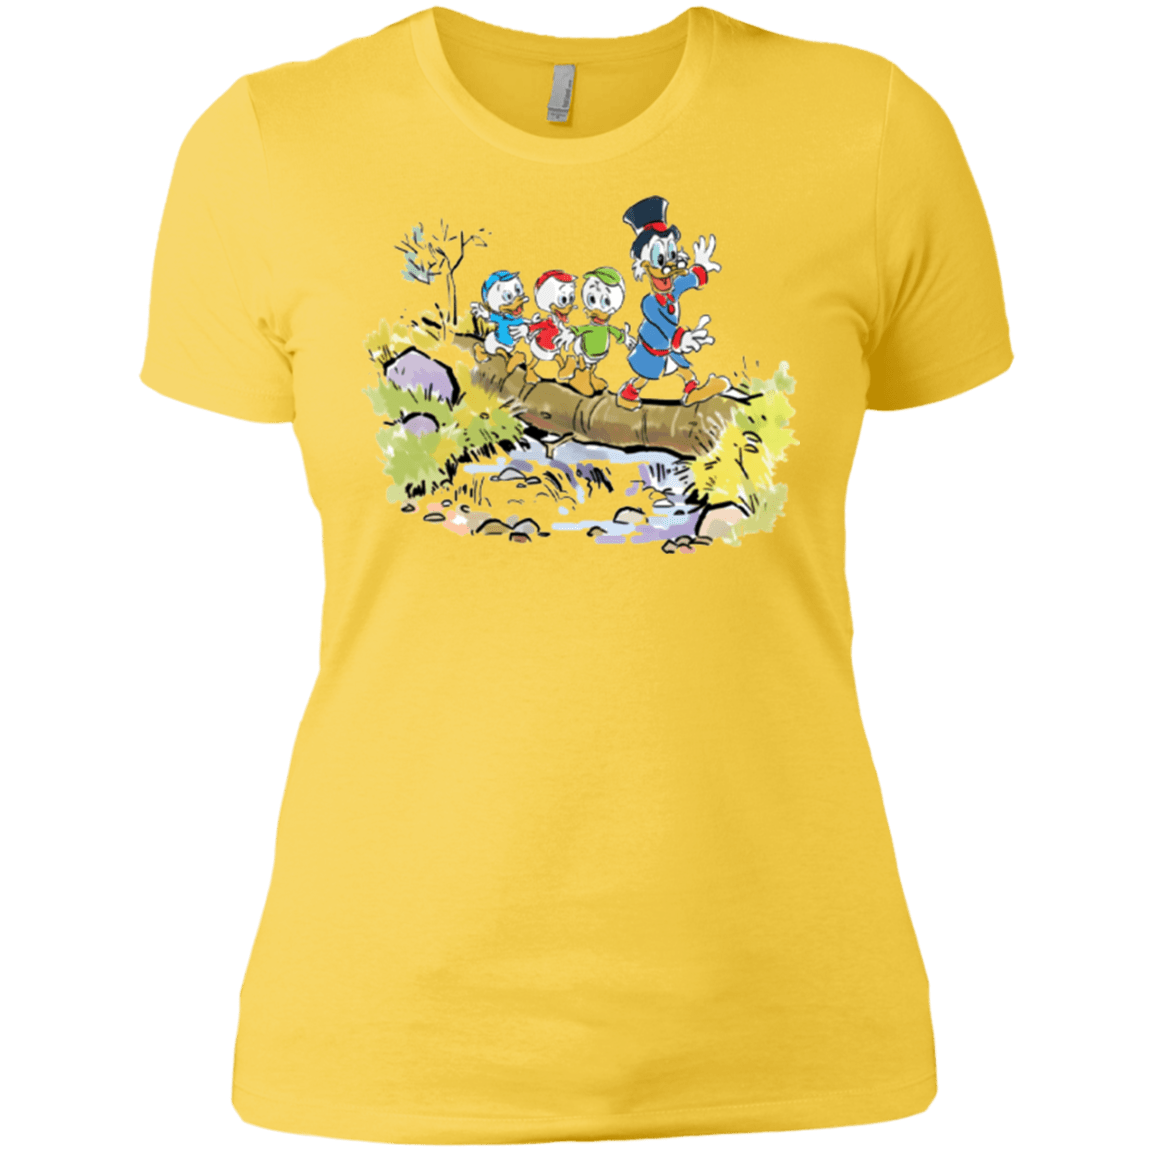 T-Shirts Vibrant Yellow / X-Small Looking for Adventure Women's Premium T-Shirt